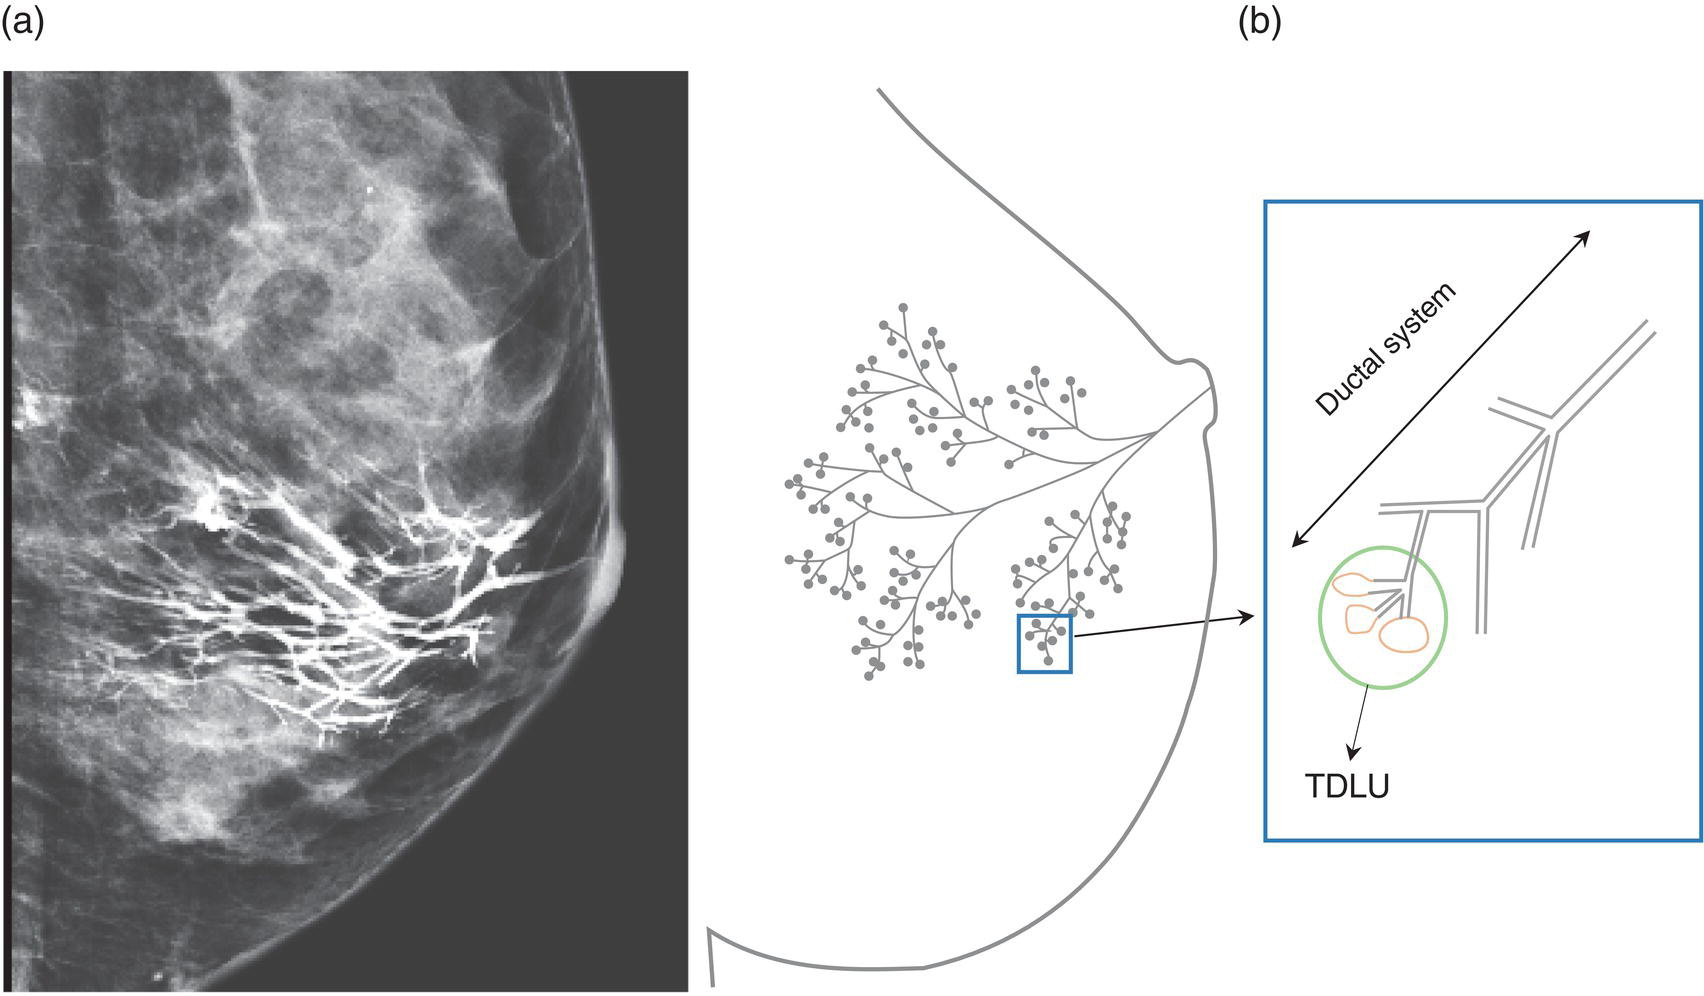 Schematic illustration of (a) lateral ductogram mammographic images obtained immediately following intraductal contrast administration via cannulation of a single periareolar lactiferous duct, illustrating the extent of a single lactiferous duct.